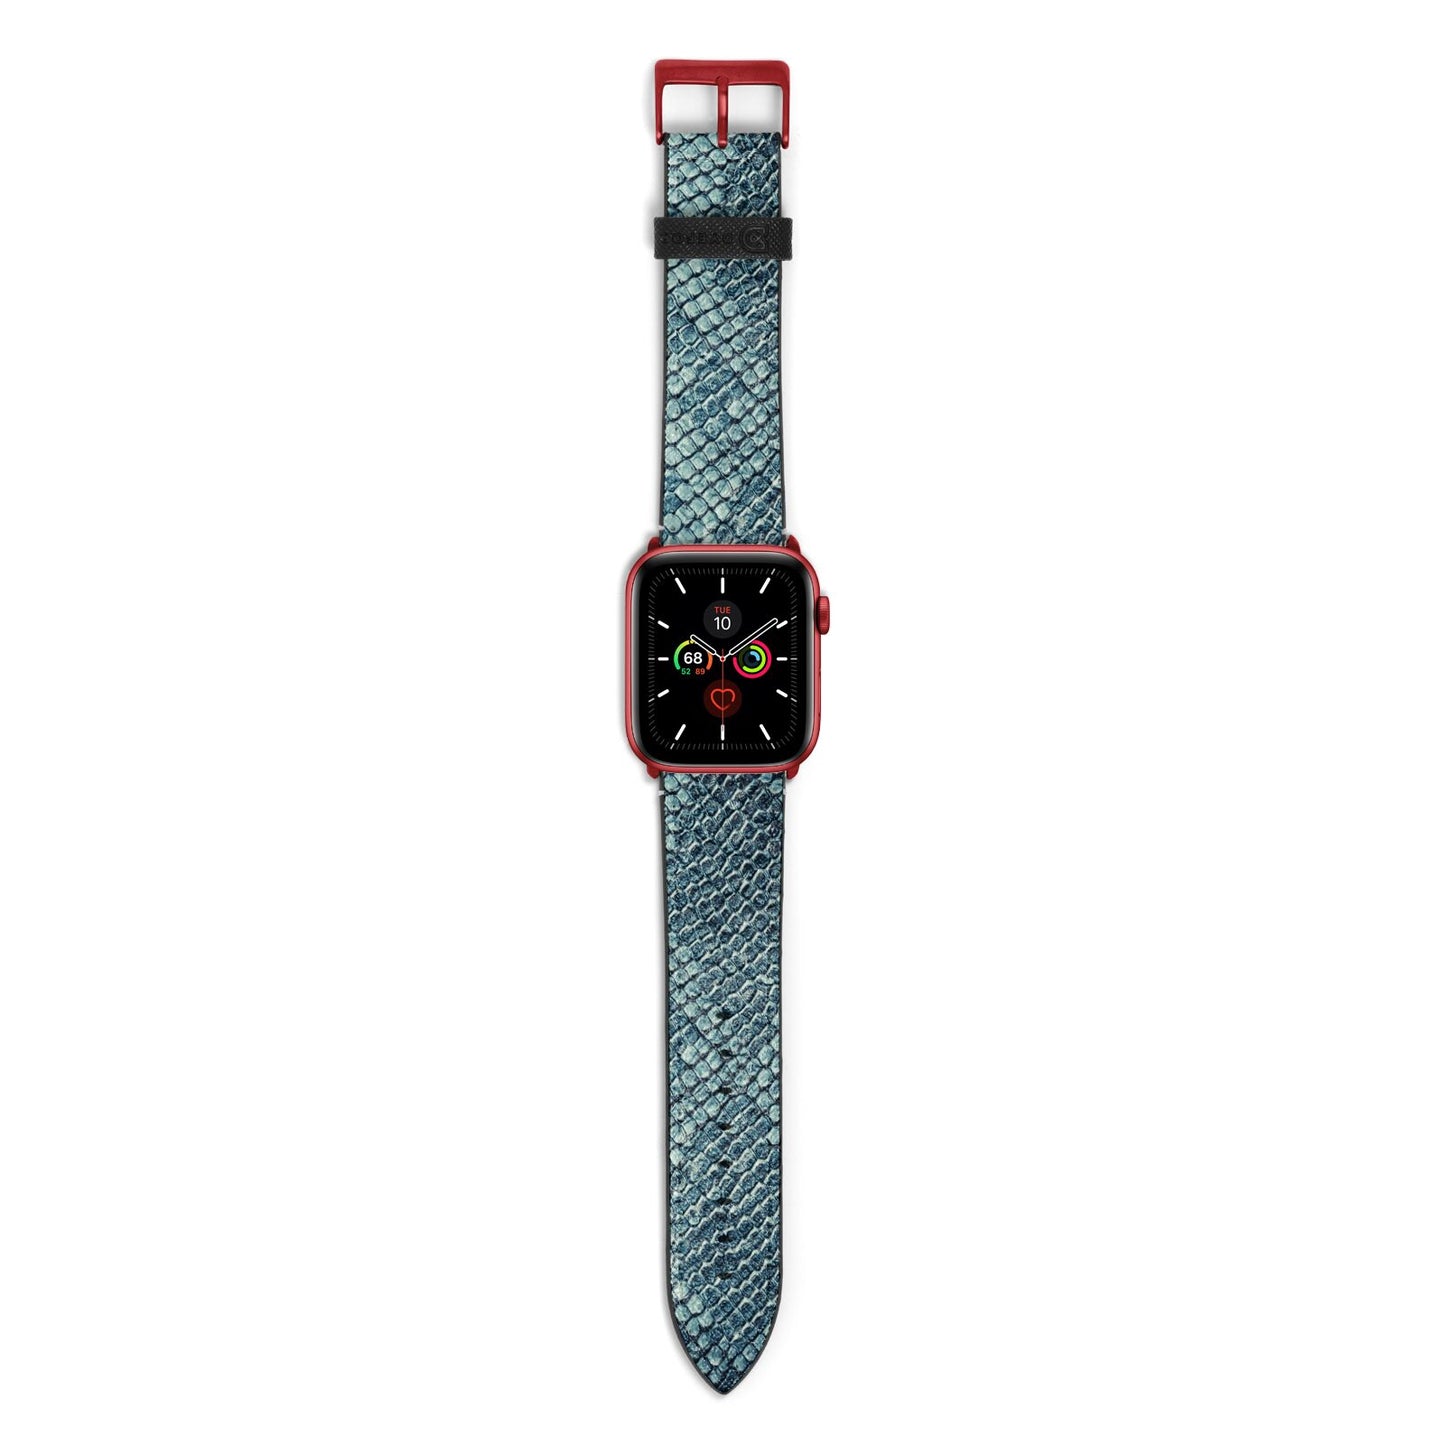 Teal Snakeskin Apple Watch Strap with Red Hardware